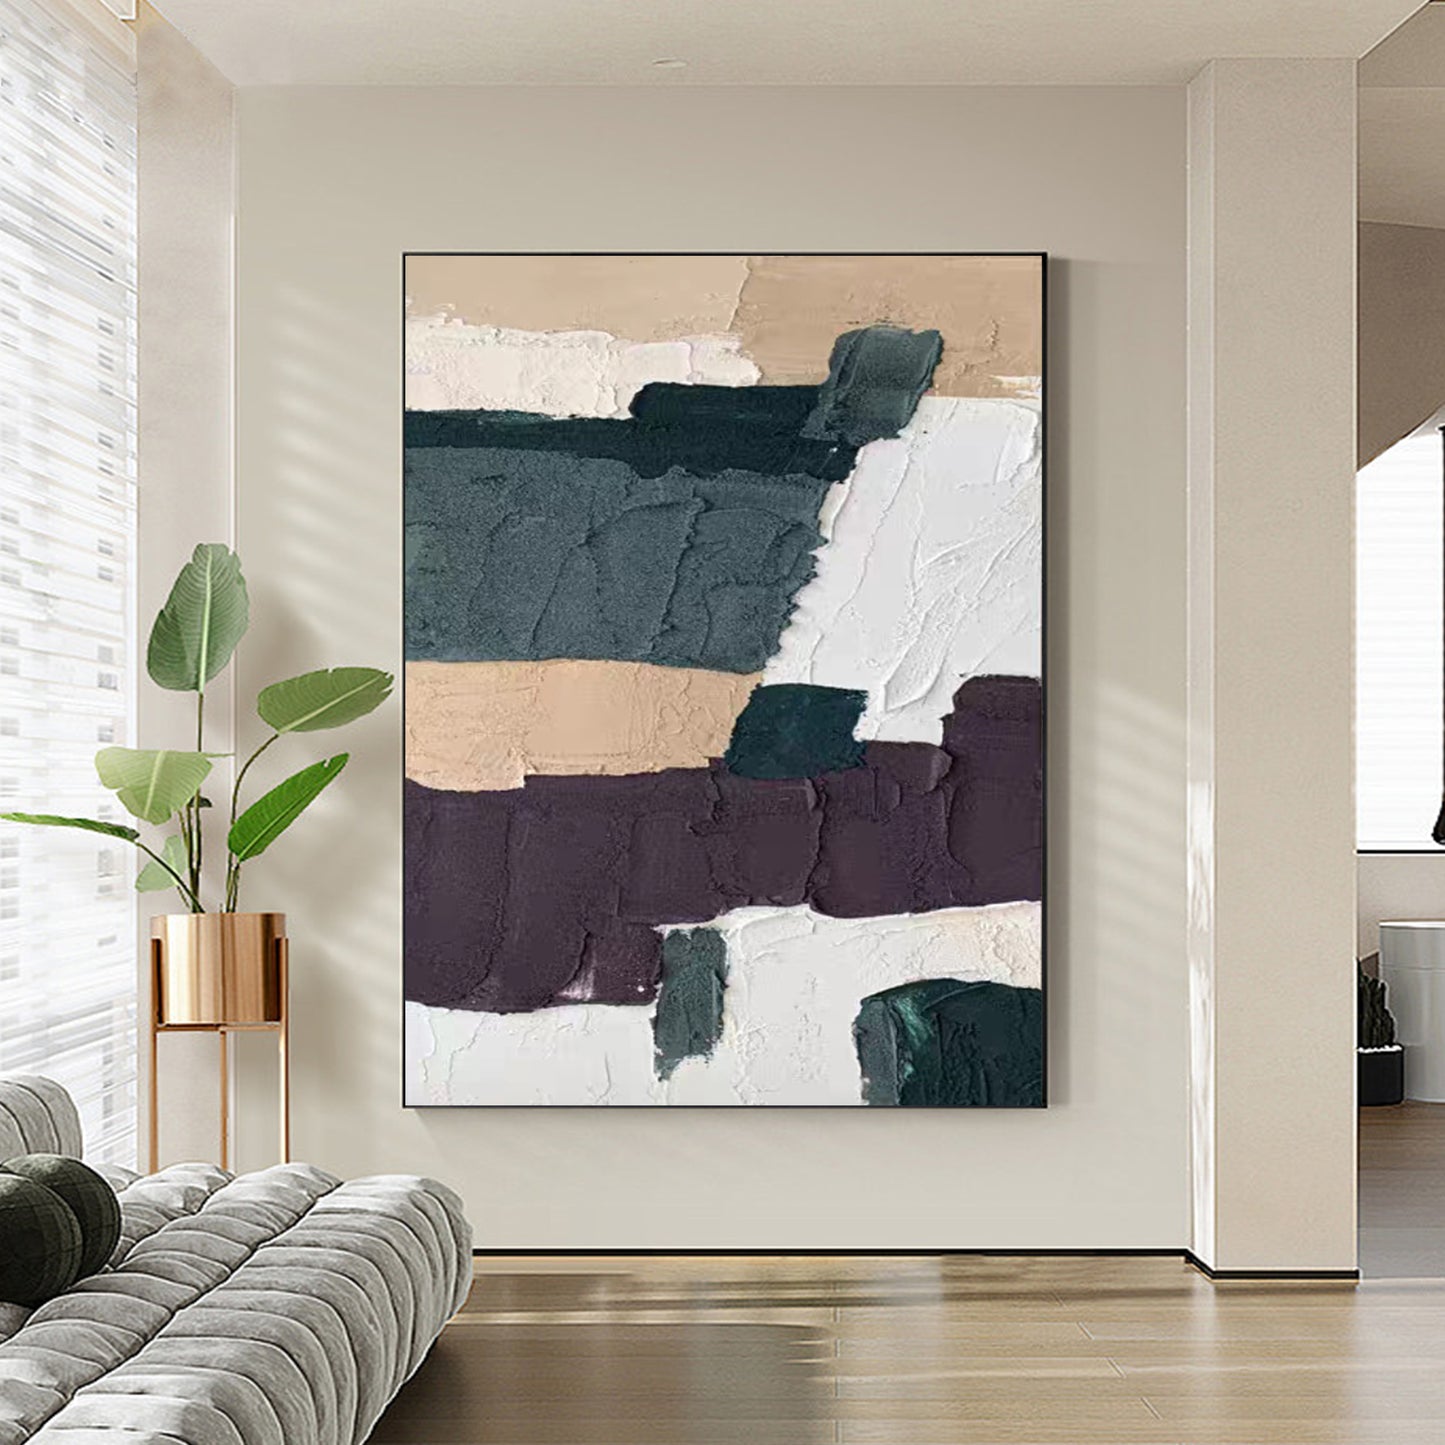 MINIMALIST PAINTING, THICK TEXTURE NAVY AND BROWN, HAND-PAINTED CANVAS